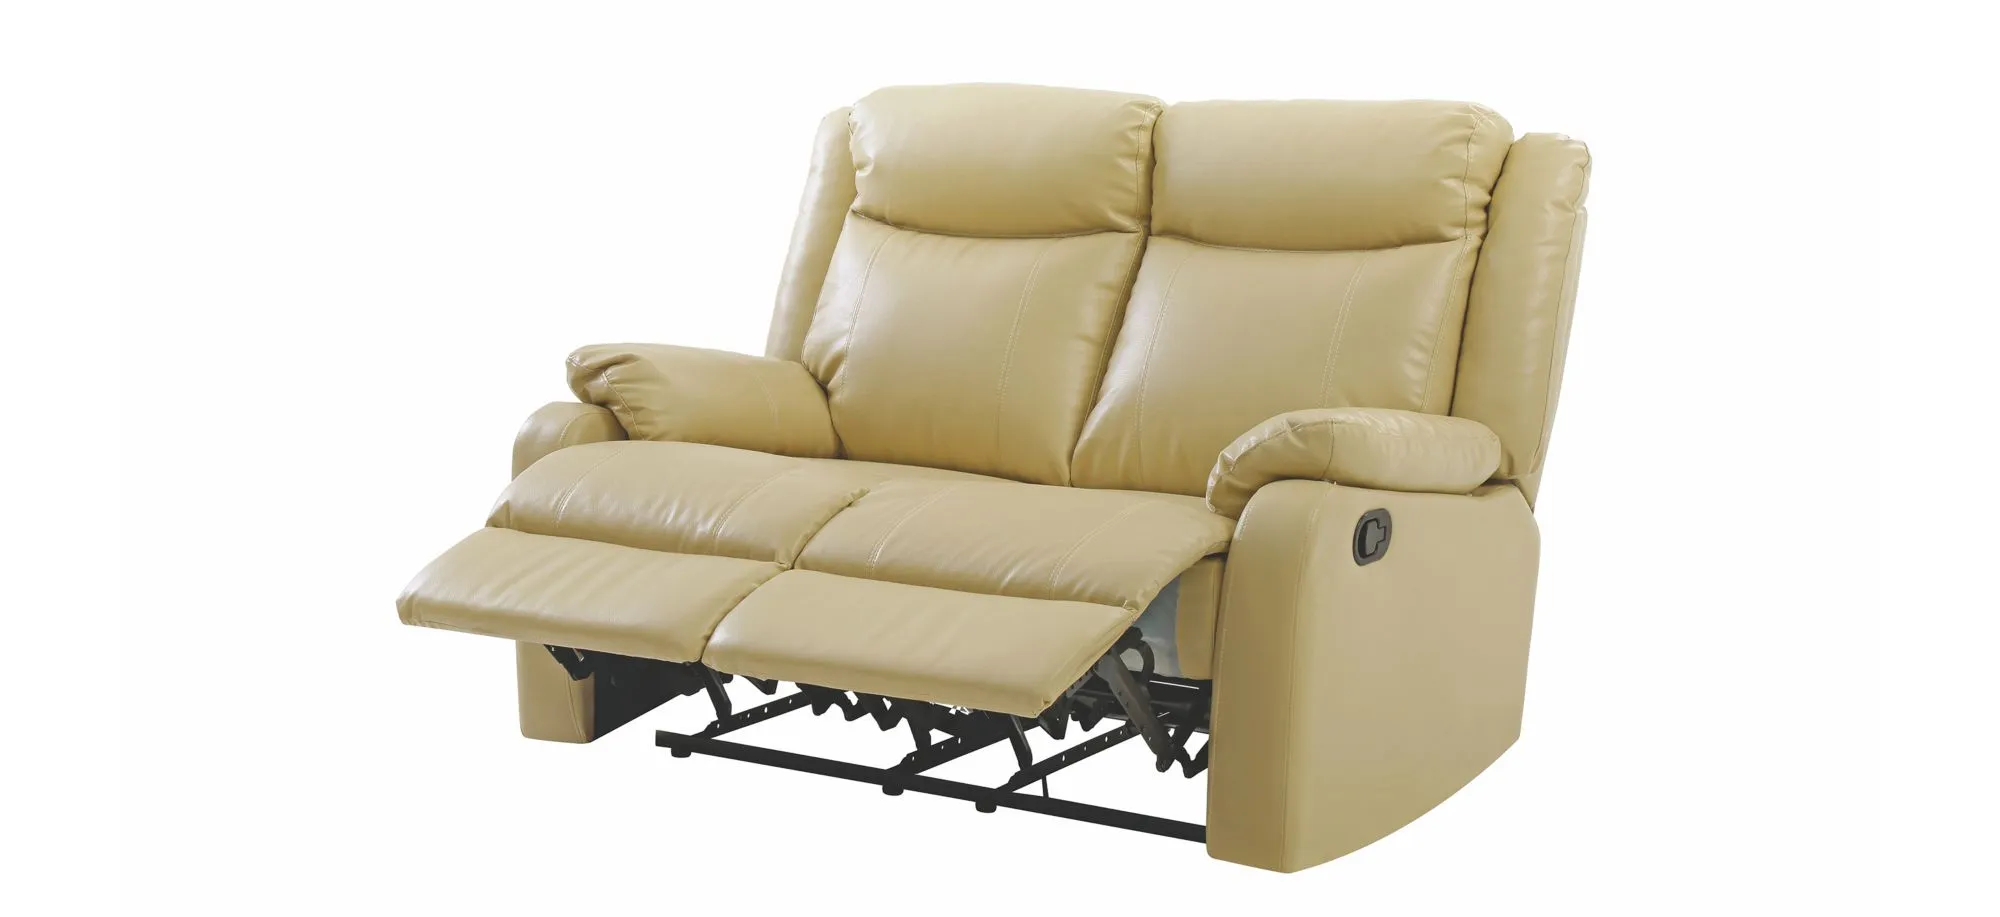 Ward Double Reclining Loveseat in Putty by Glory Furniture